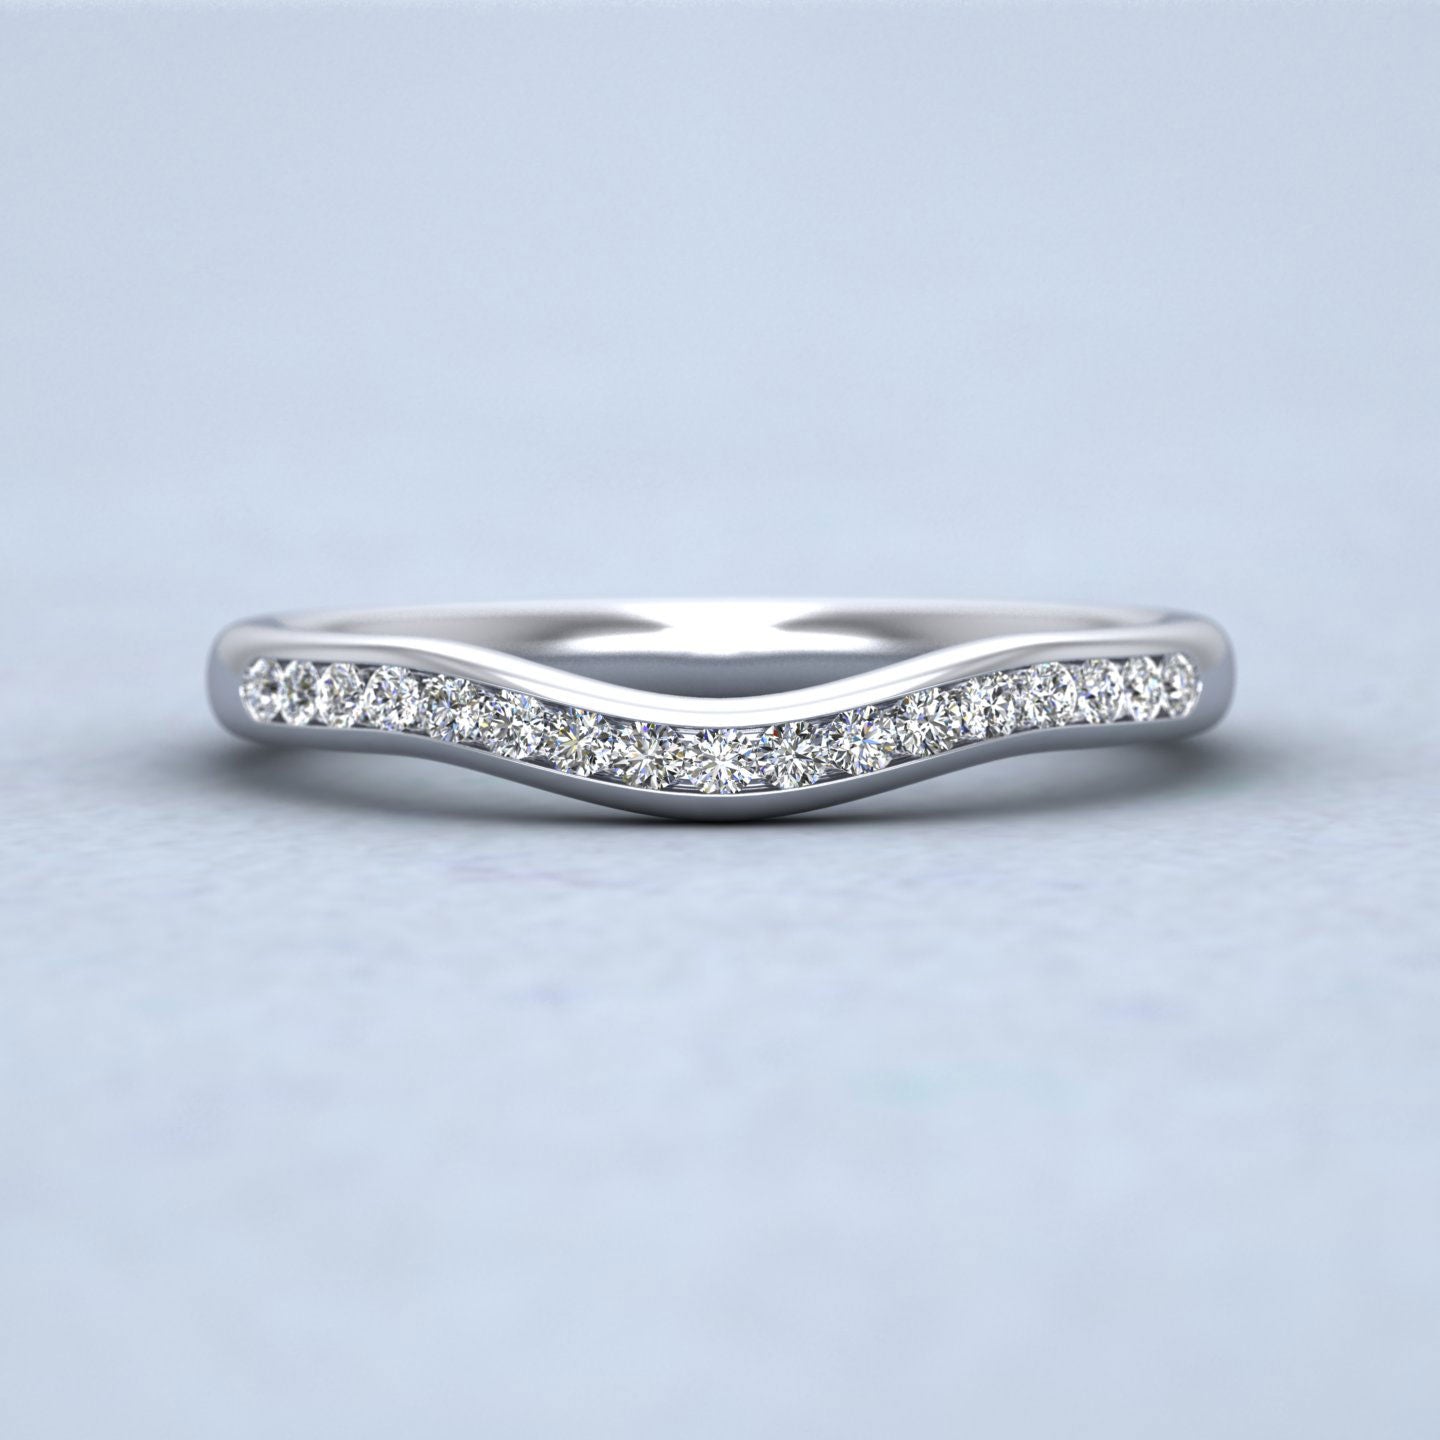 Curved To Fit Channel Set Diamond Wedding Ring In 18ct White Gold 2.25mm Wide